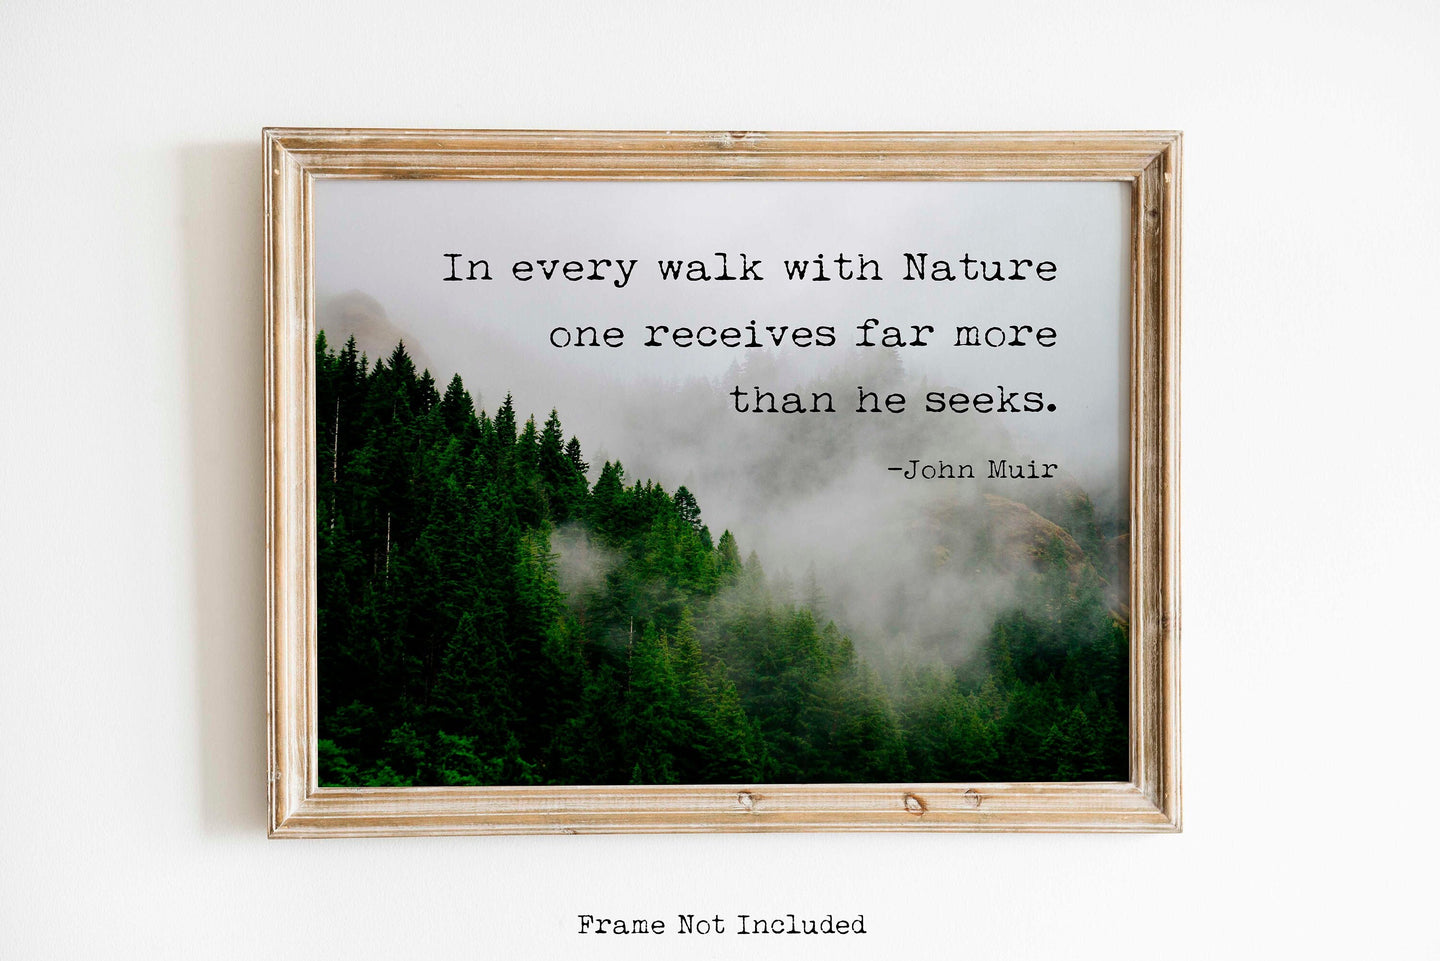 John Muir Quote - In every walk with Nature one receives far more than he seeks - Unframed print